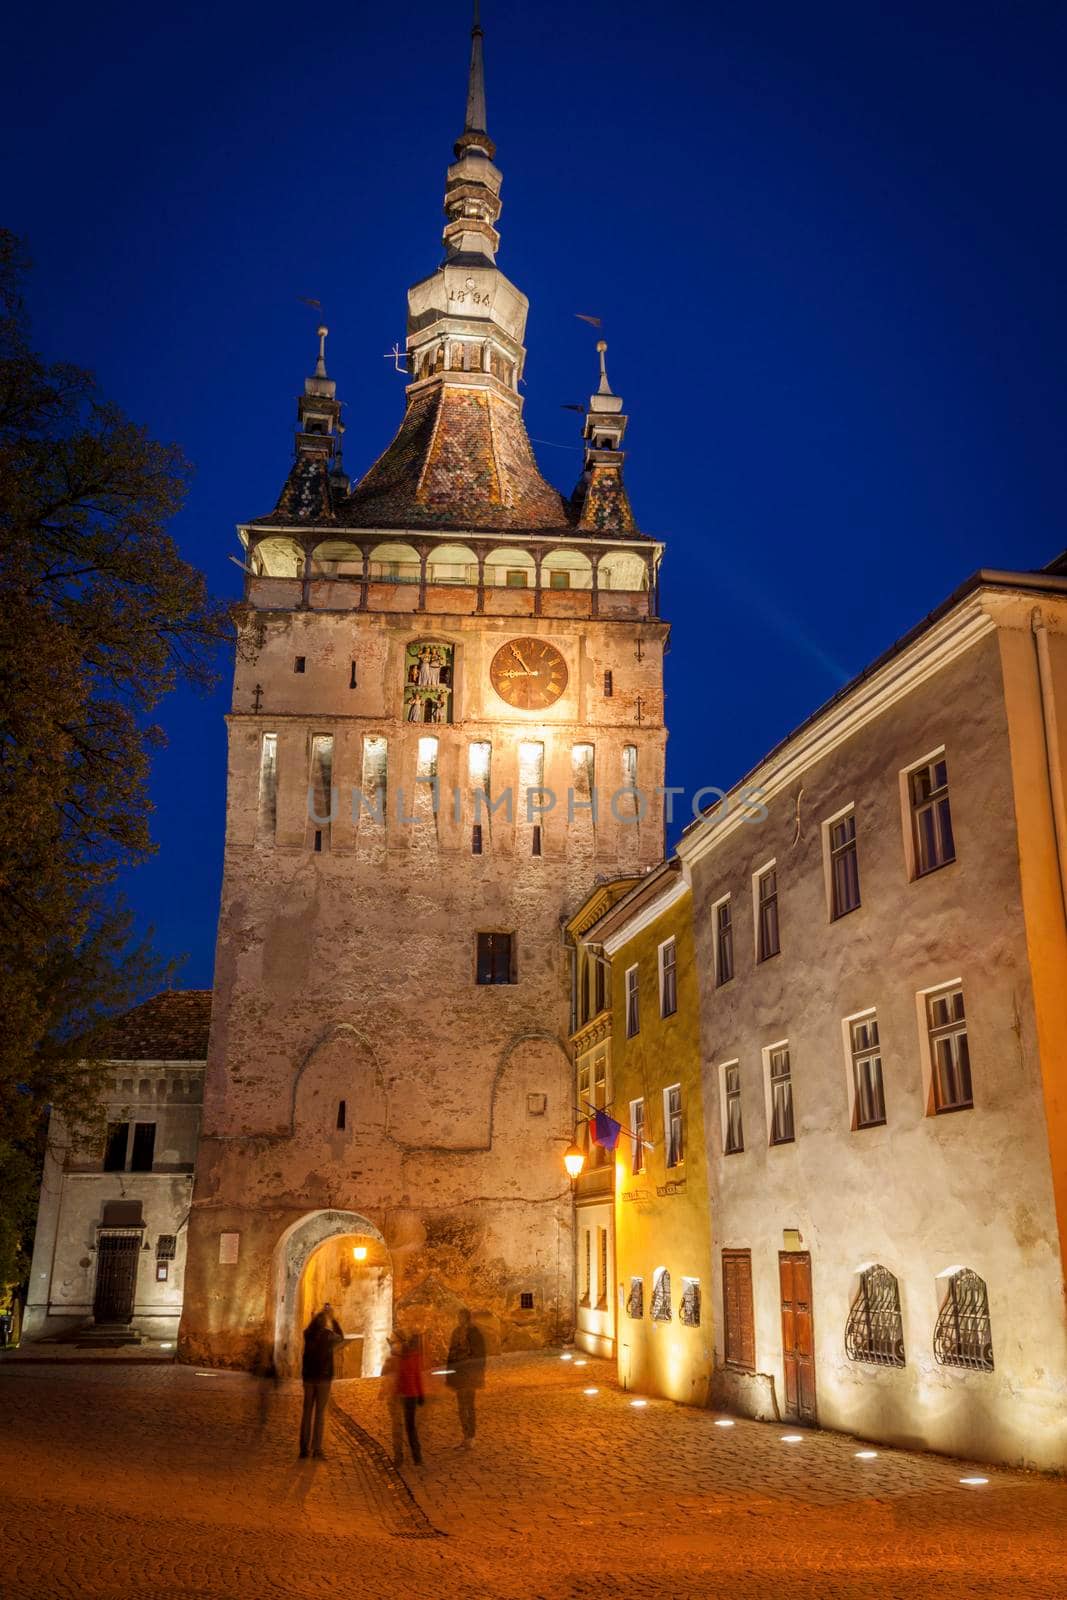 The Clock Tower in Sighisoara. Sighisoara, Mures County, Romania.